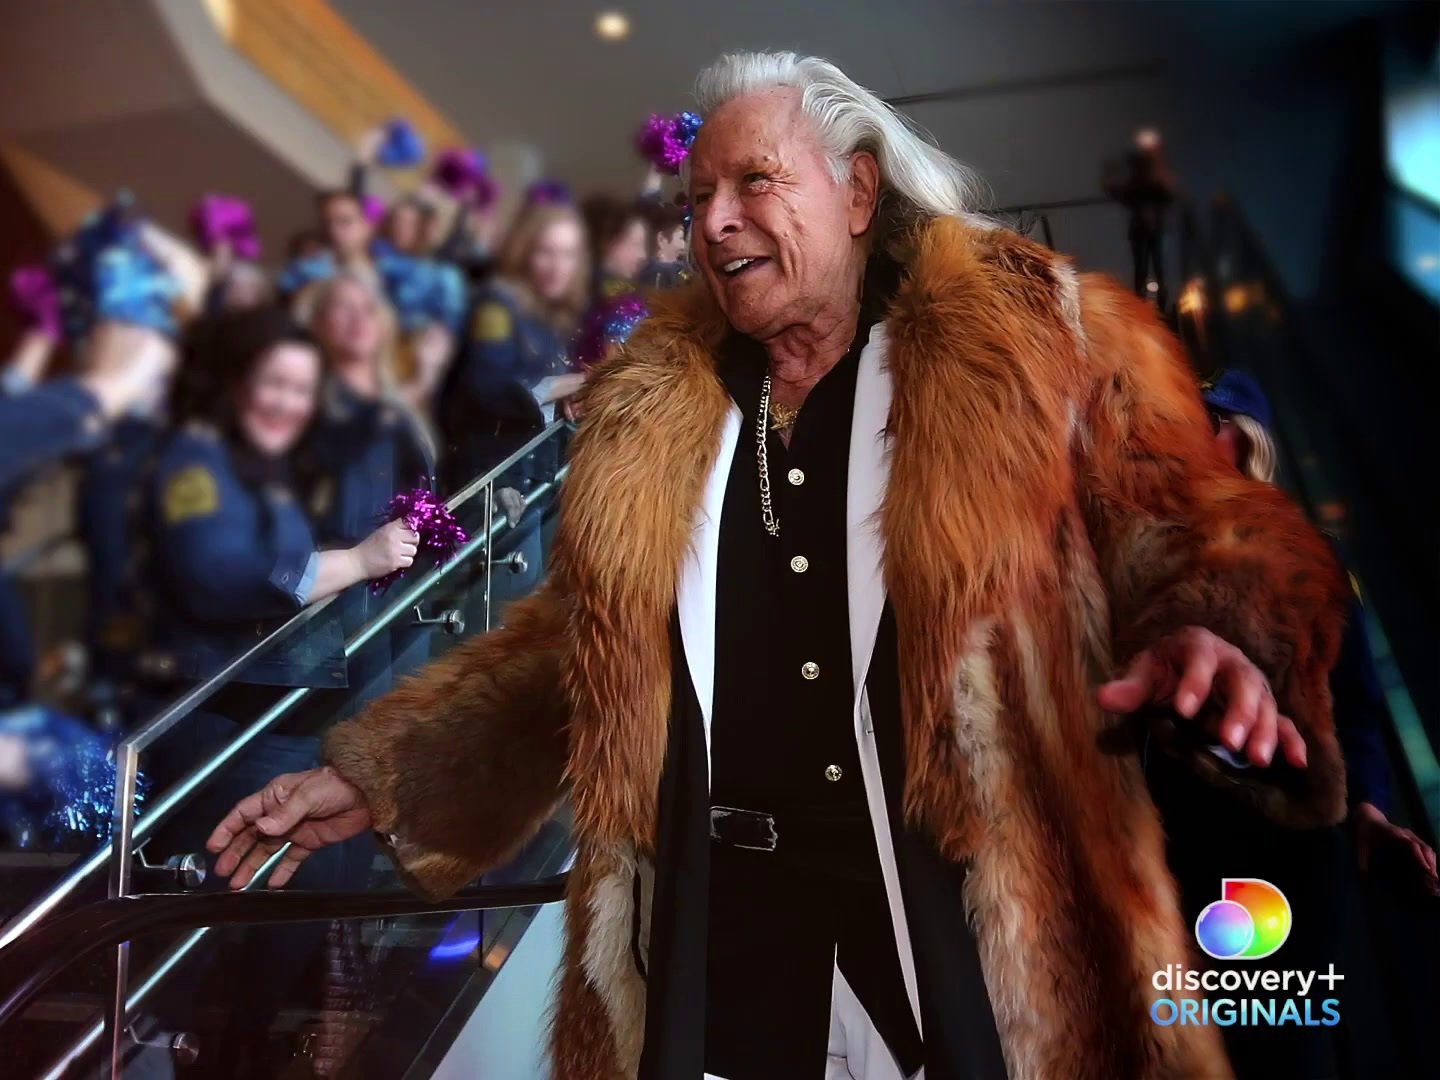 82 Year Old Fashion Tycoon Peter Nygard Convicted of Sexual Assault ...